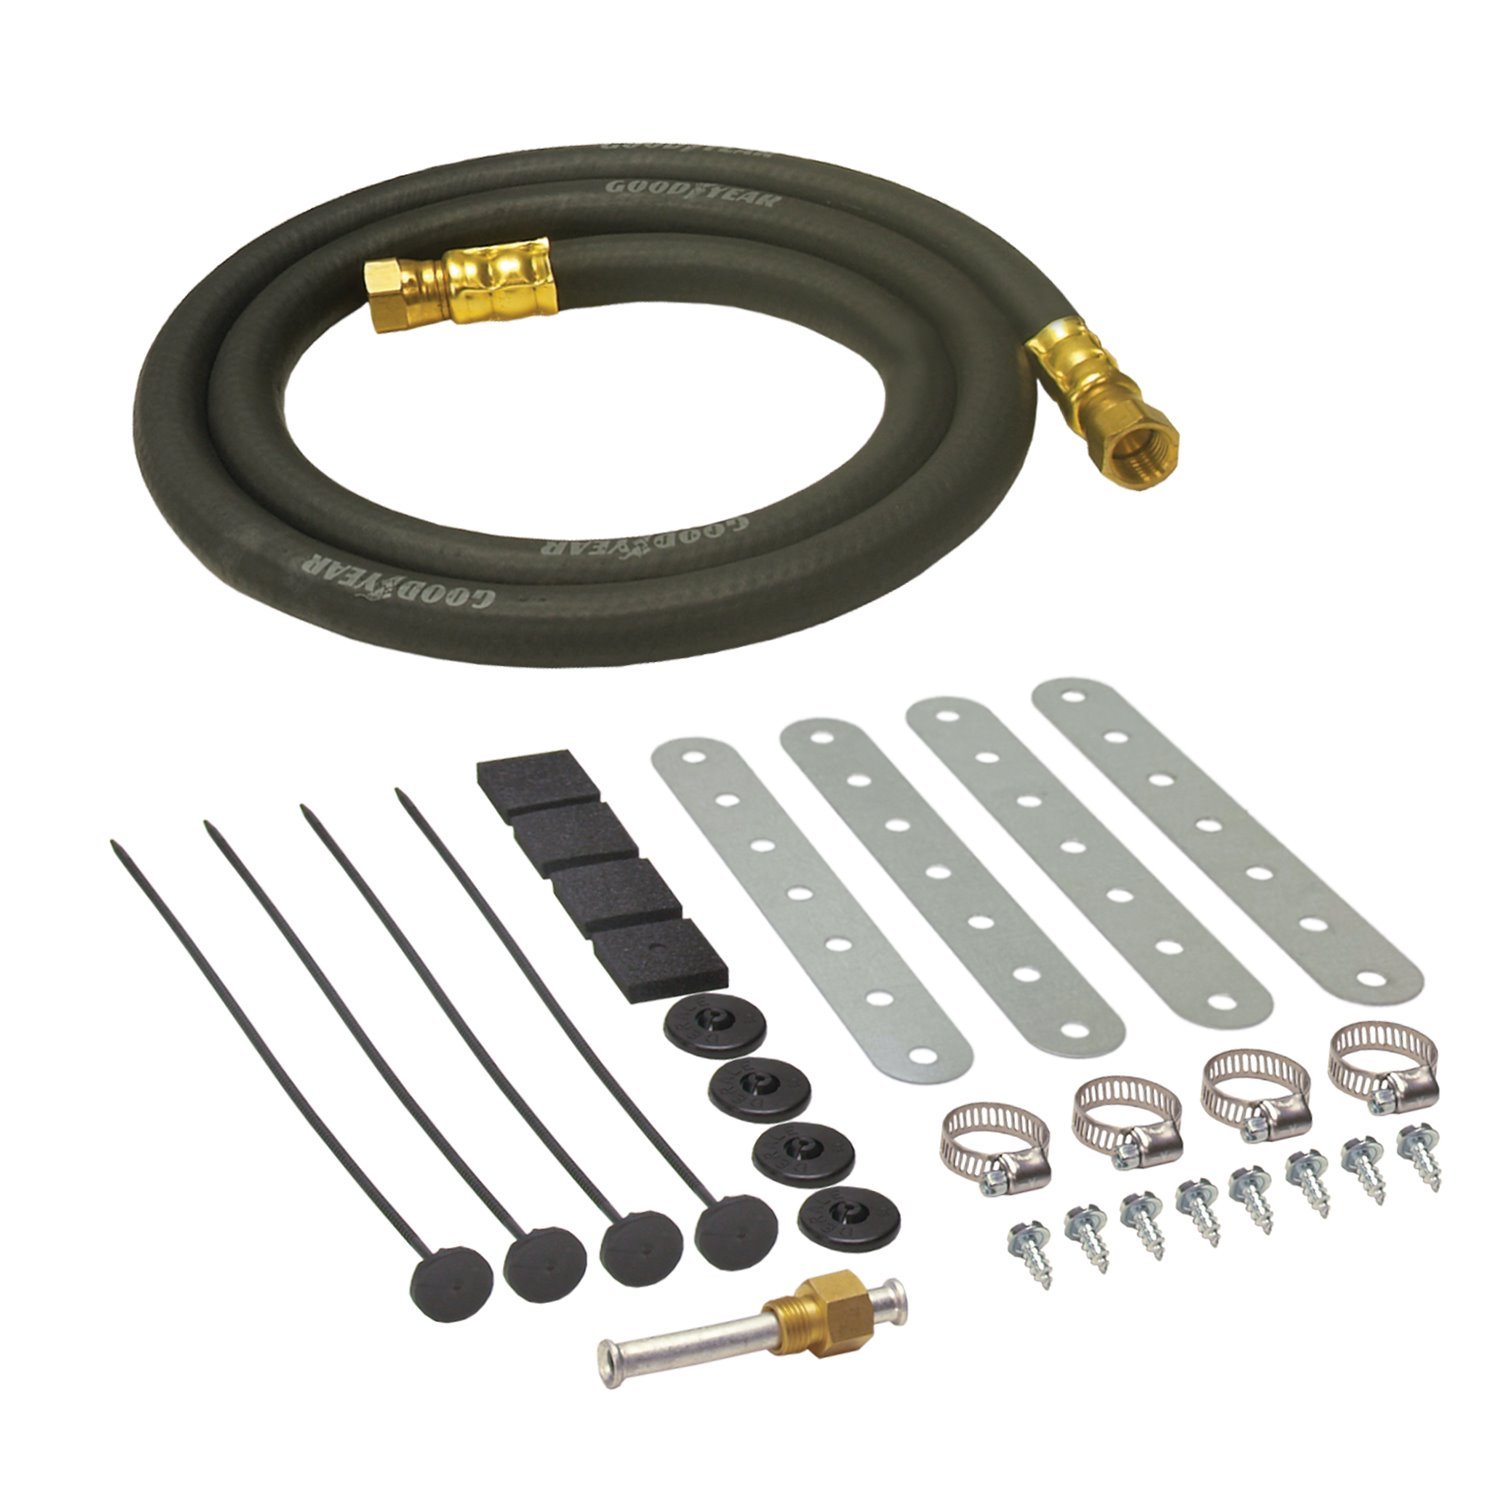 Deluxe Oil Cooler Installation Kit Plastic Rod and